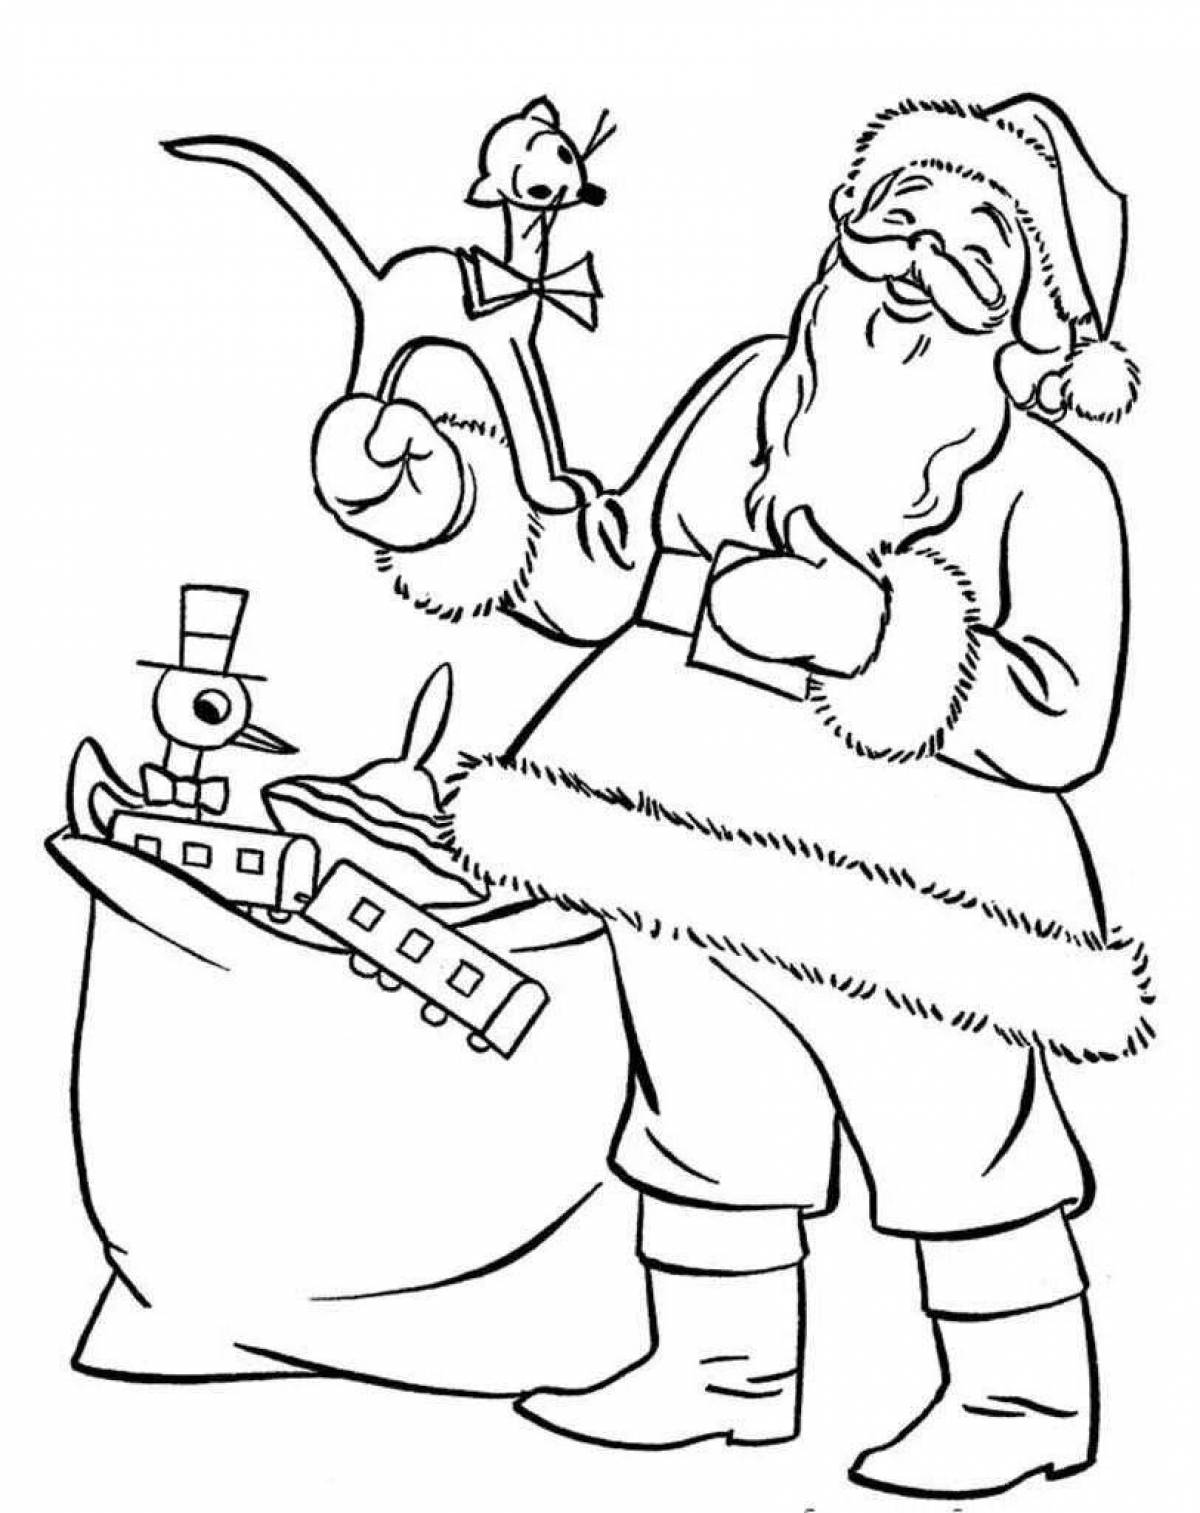 Coloring page glamorous Santa Claus with a bag